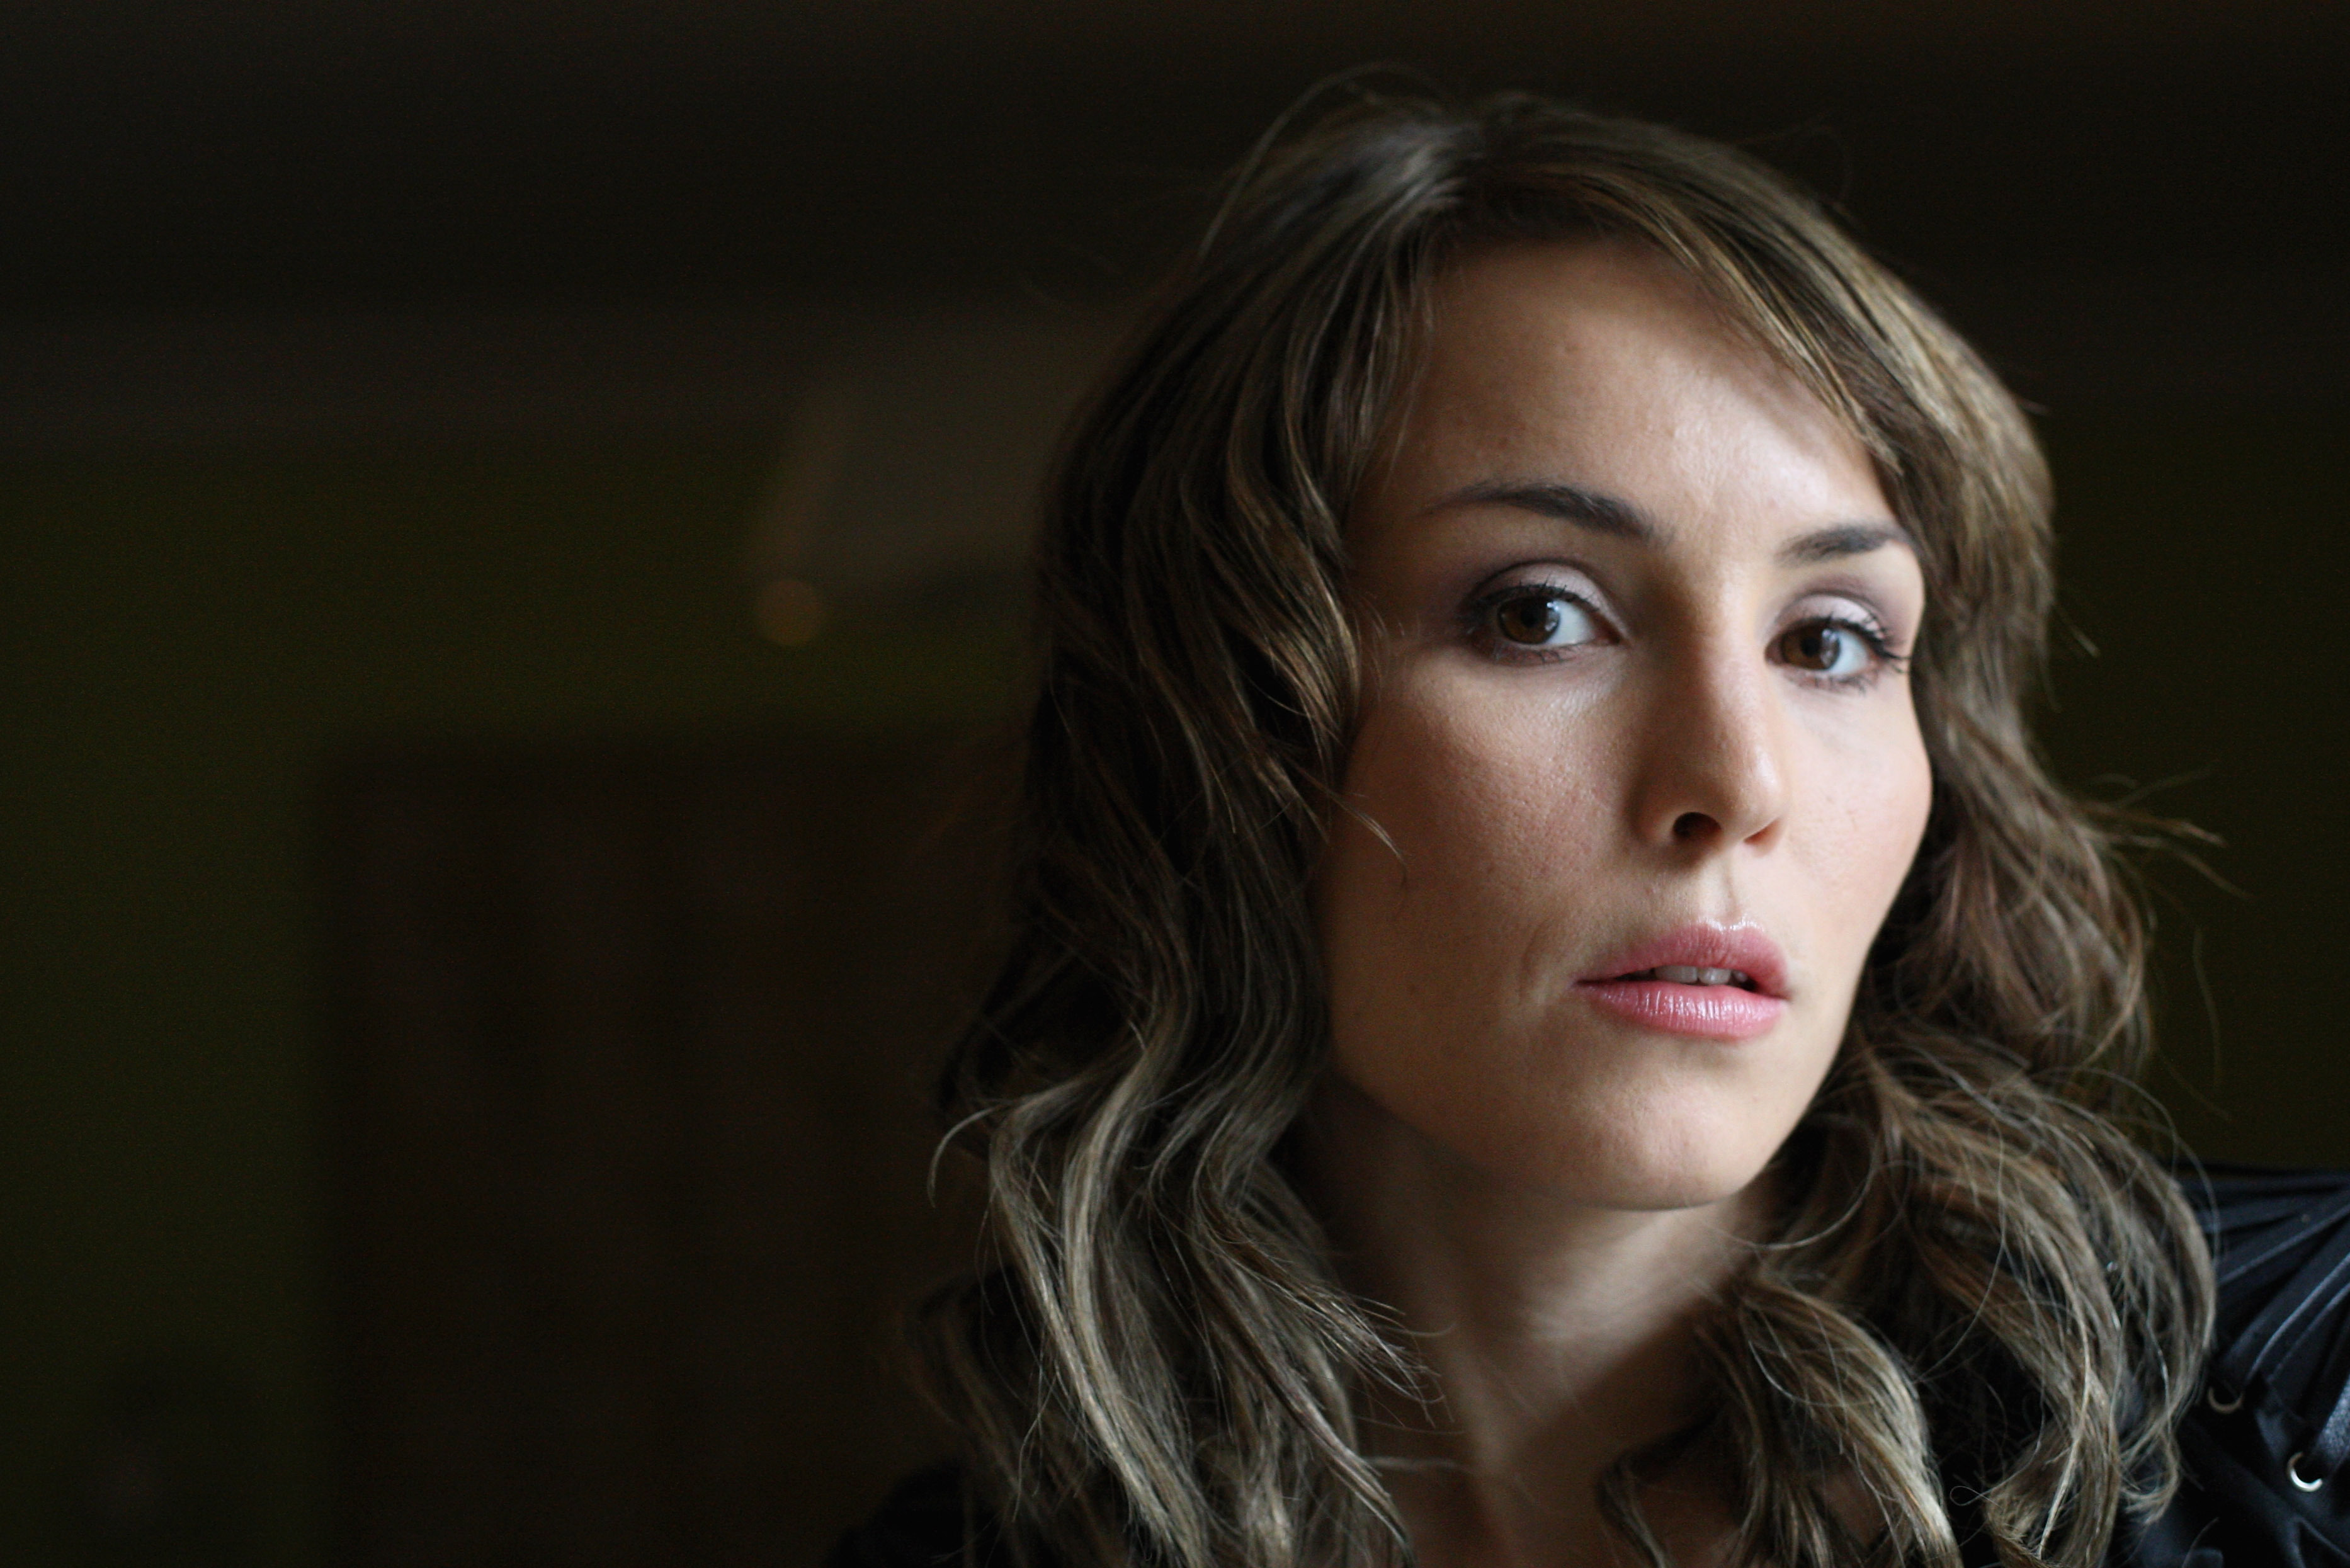 Noomi Rapace Background